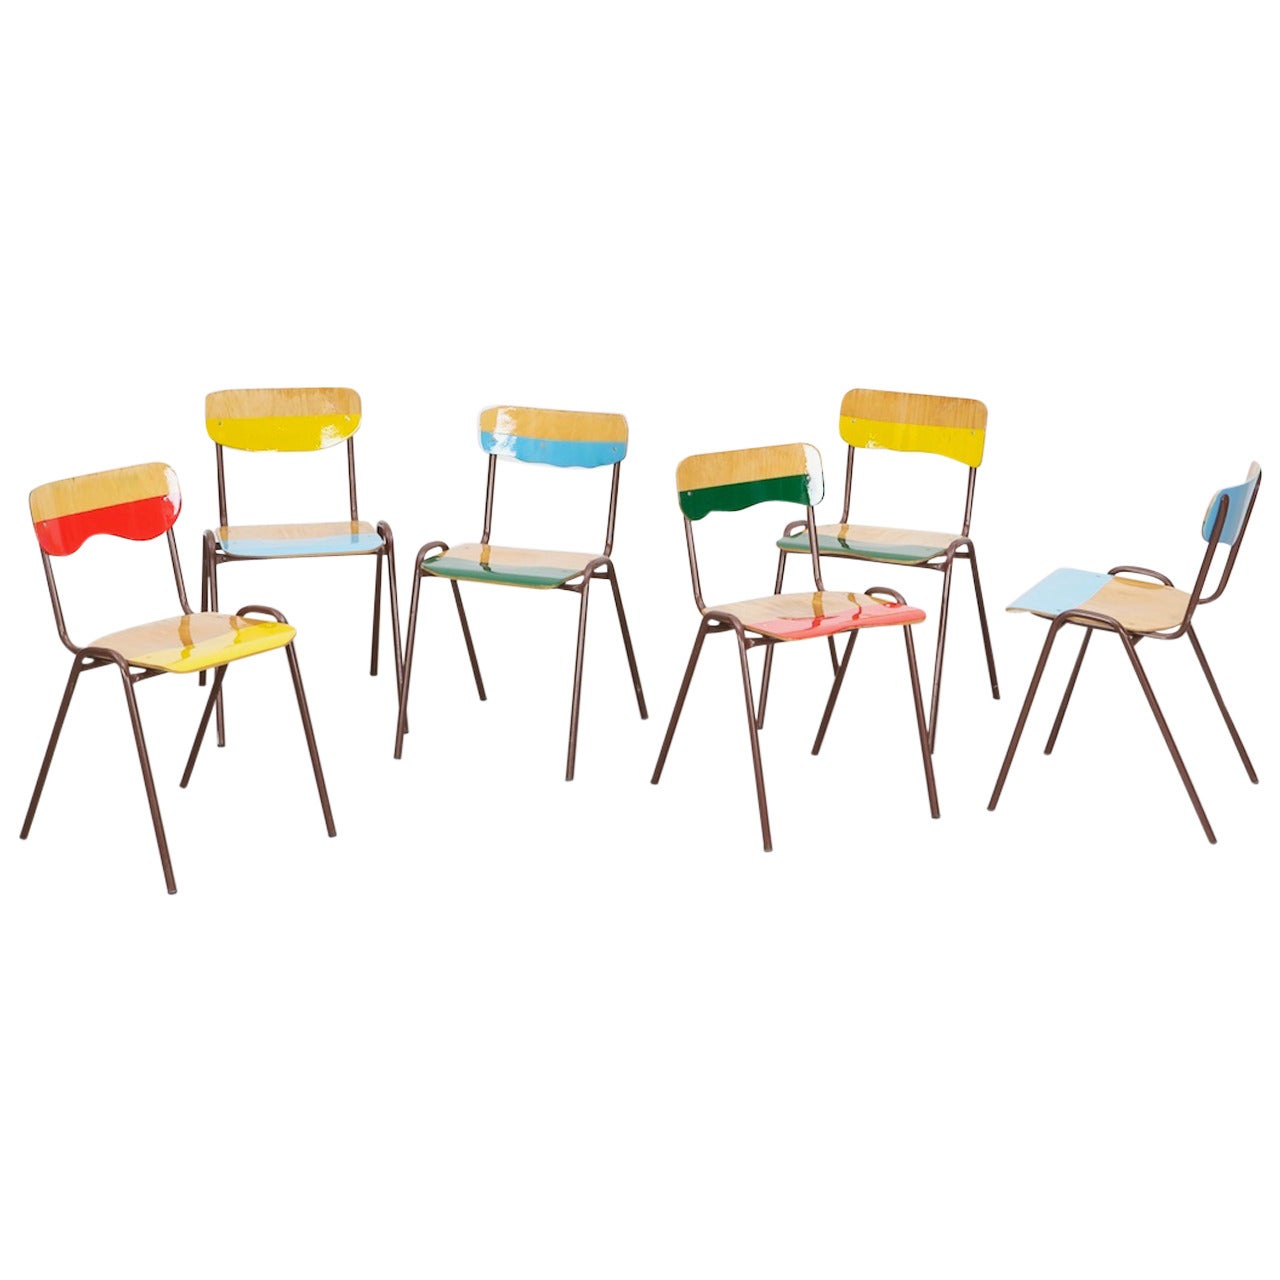 Set of Six Chairs from the Flitter Flatter Series by Marcus Friedrich Staab For Sale